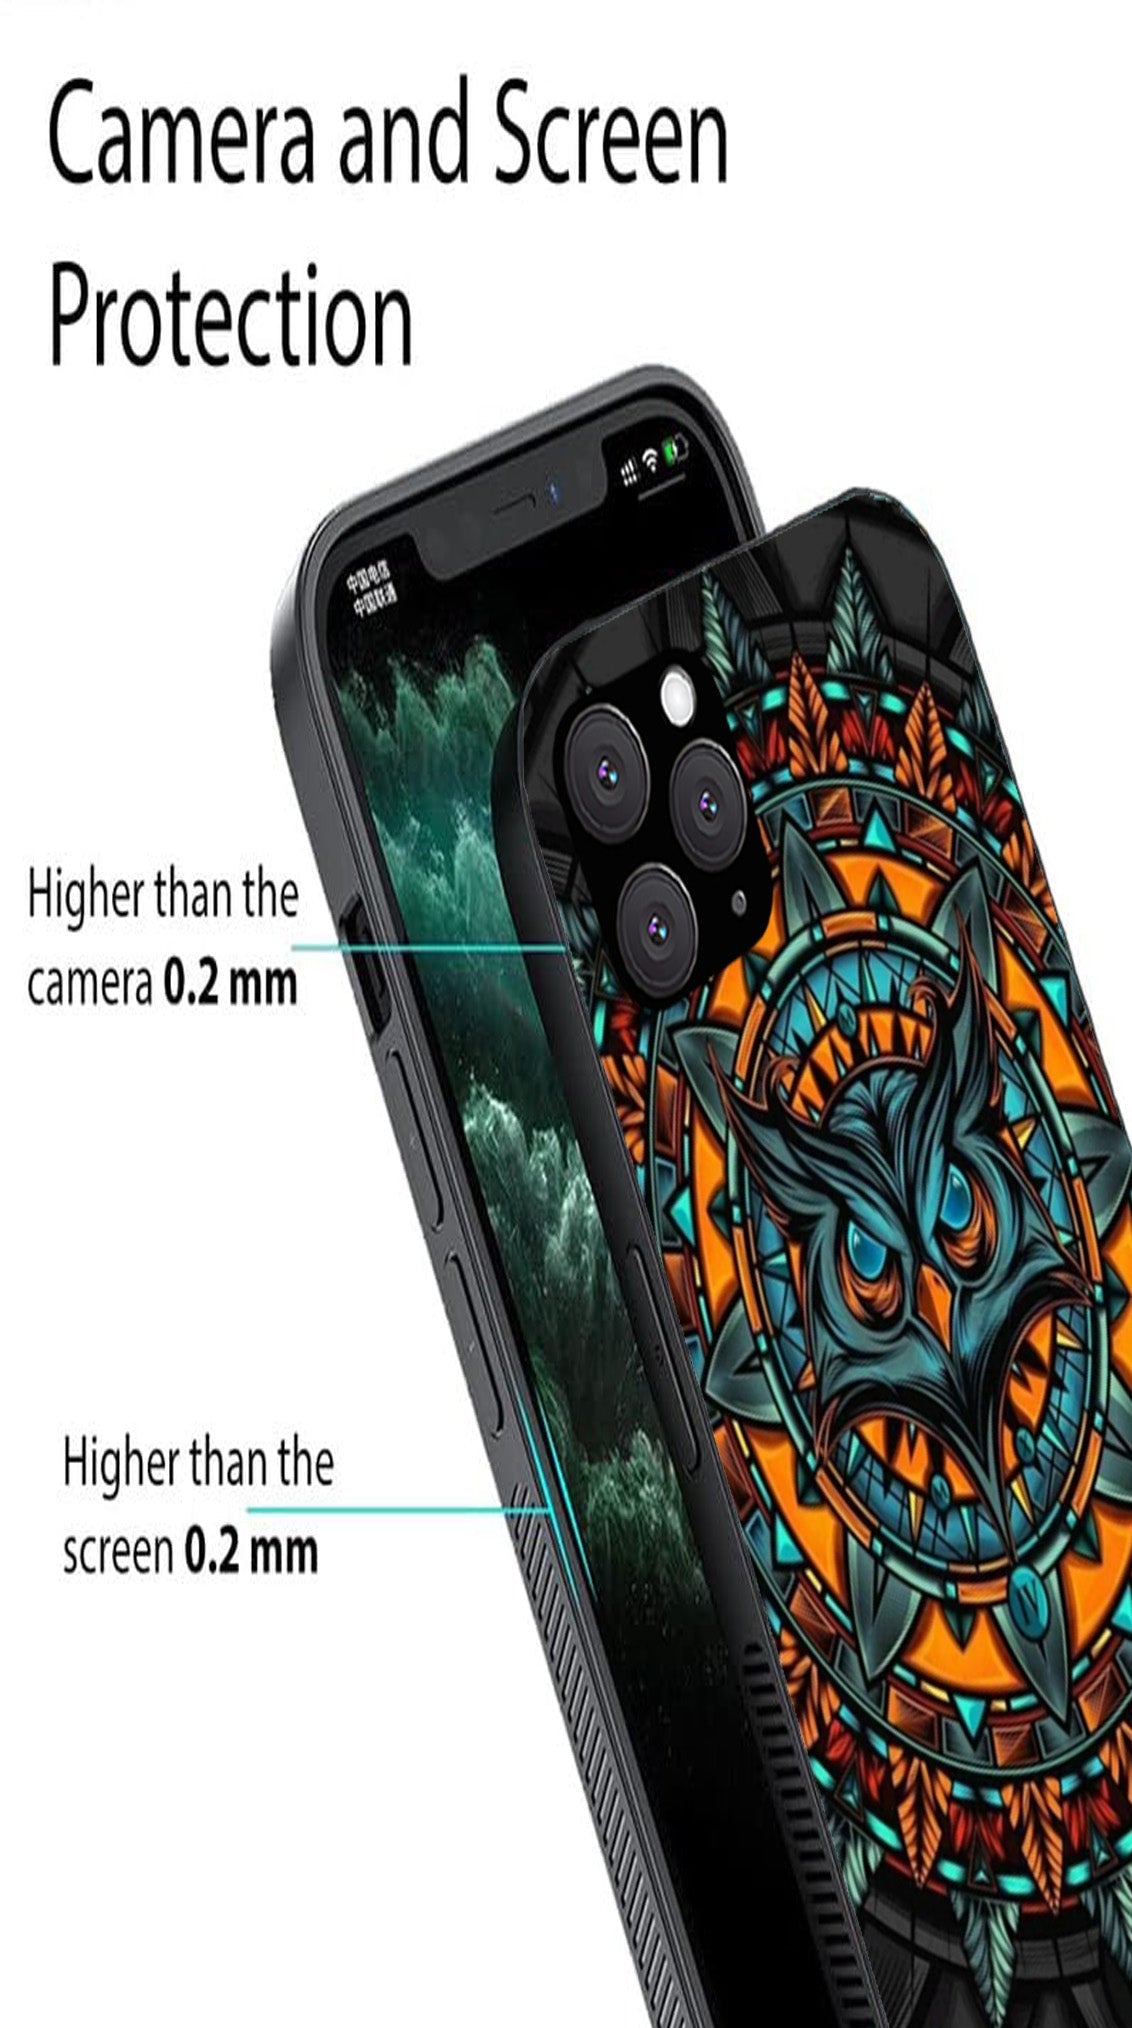 Owl Pattern Metal Mobile Case for iPhone 11 Pro